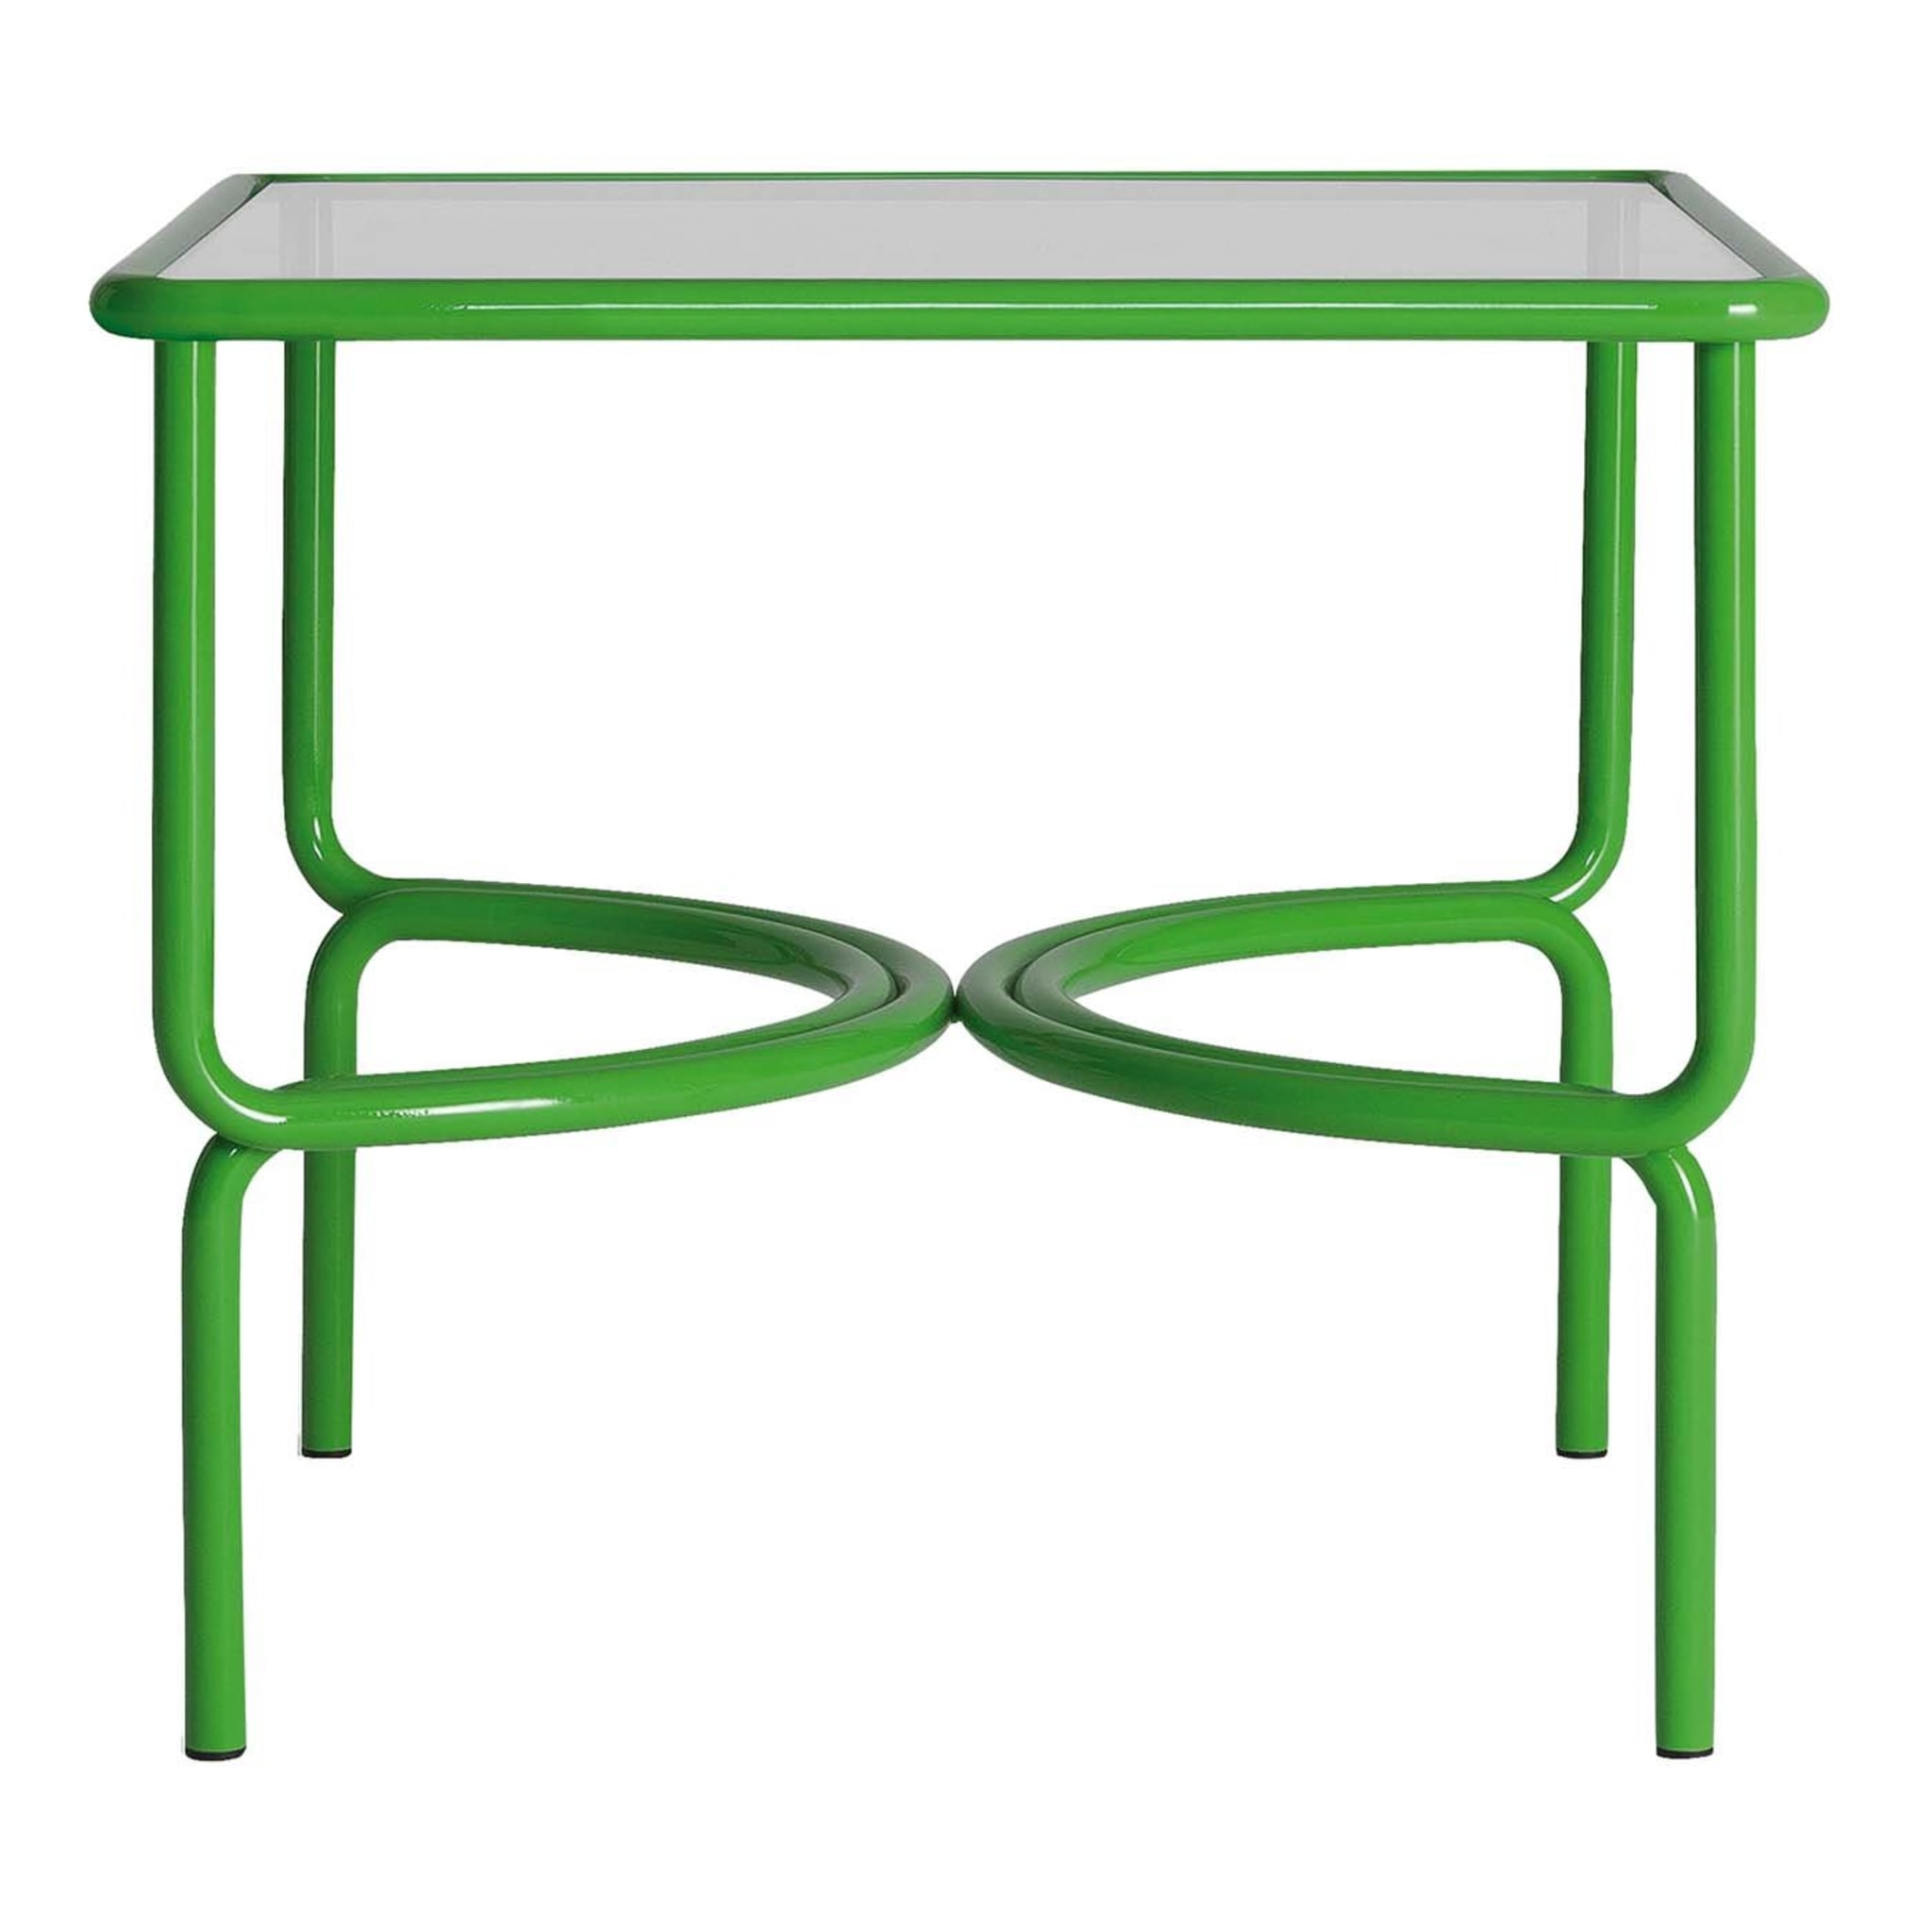 Locus Solus Green Bistro Table by Gae Aulenti - Main view